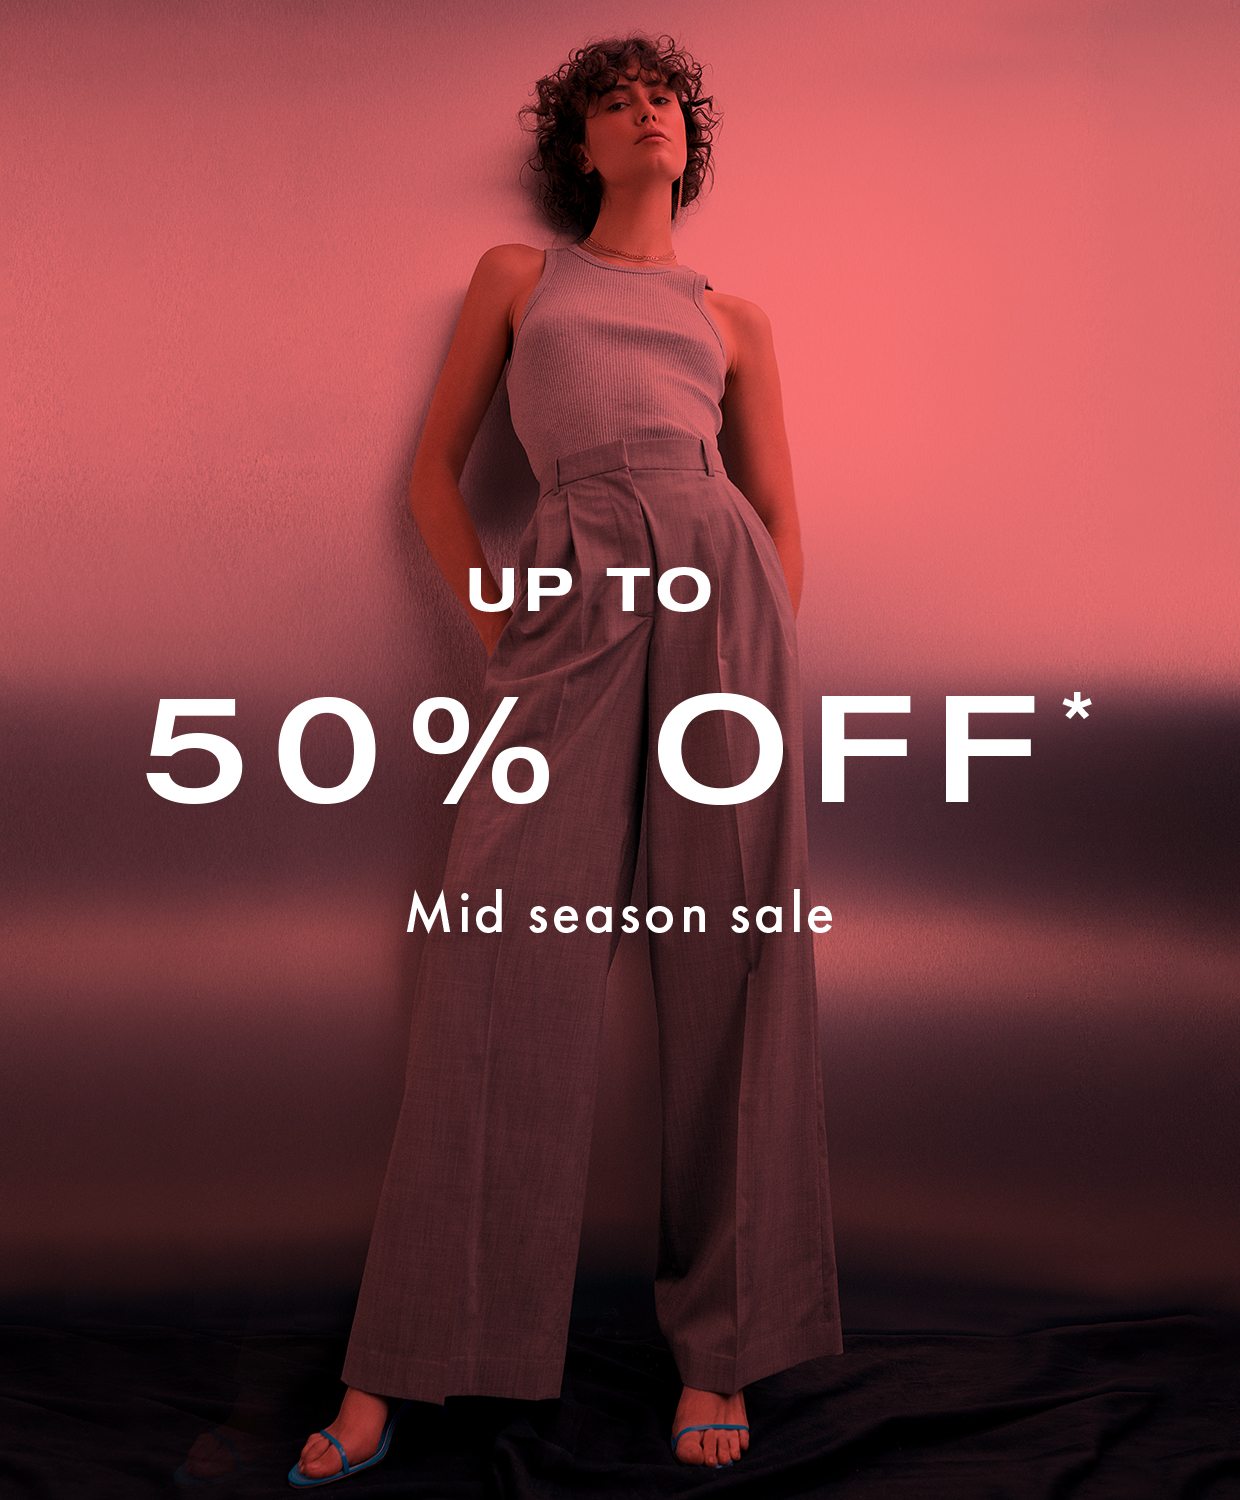 SHOP UP TO 50% OFF